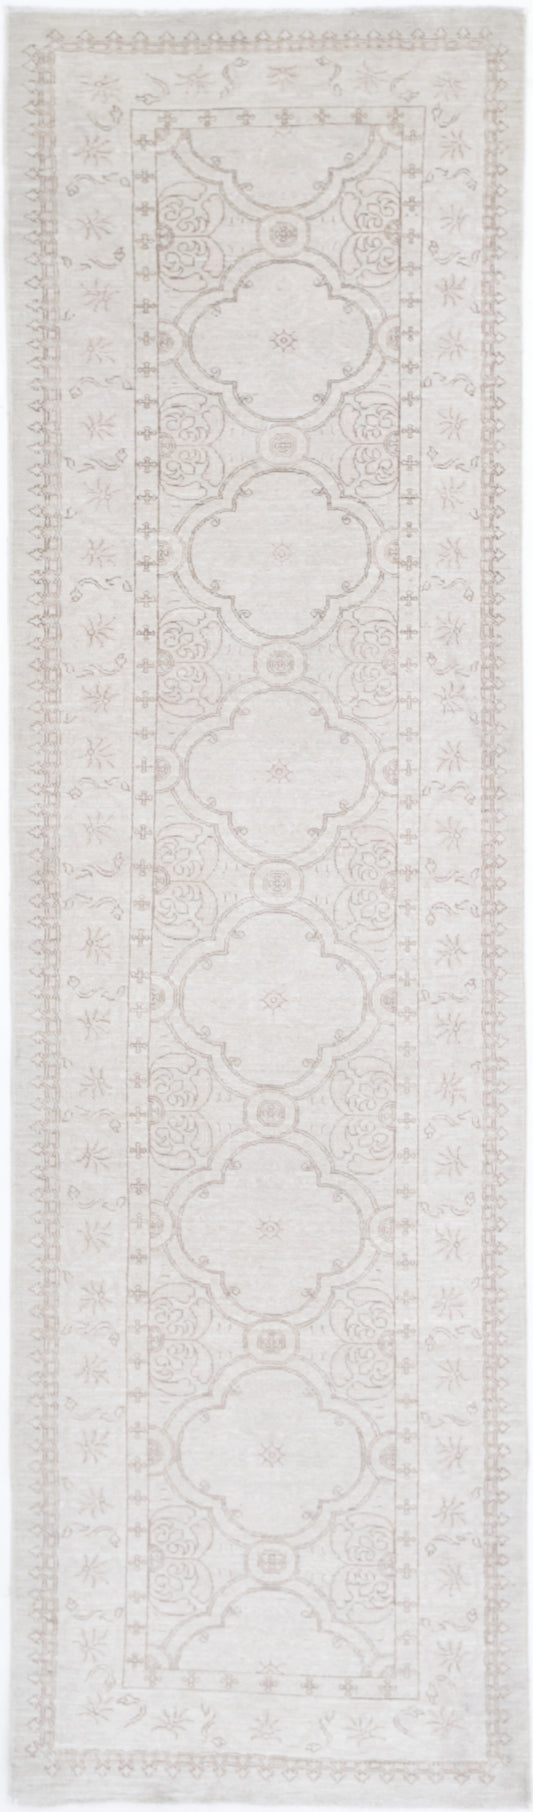 Traditional Hand Knotted Serenity Tabriz Wool Rug of Size 2'10'' X 10'10'' in Ivory and Taupe Colors - Made in Afghanistan